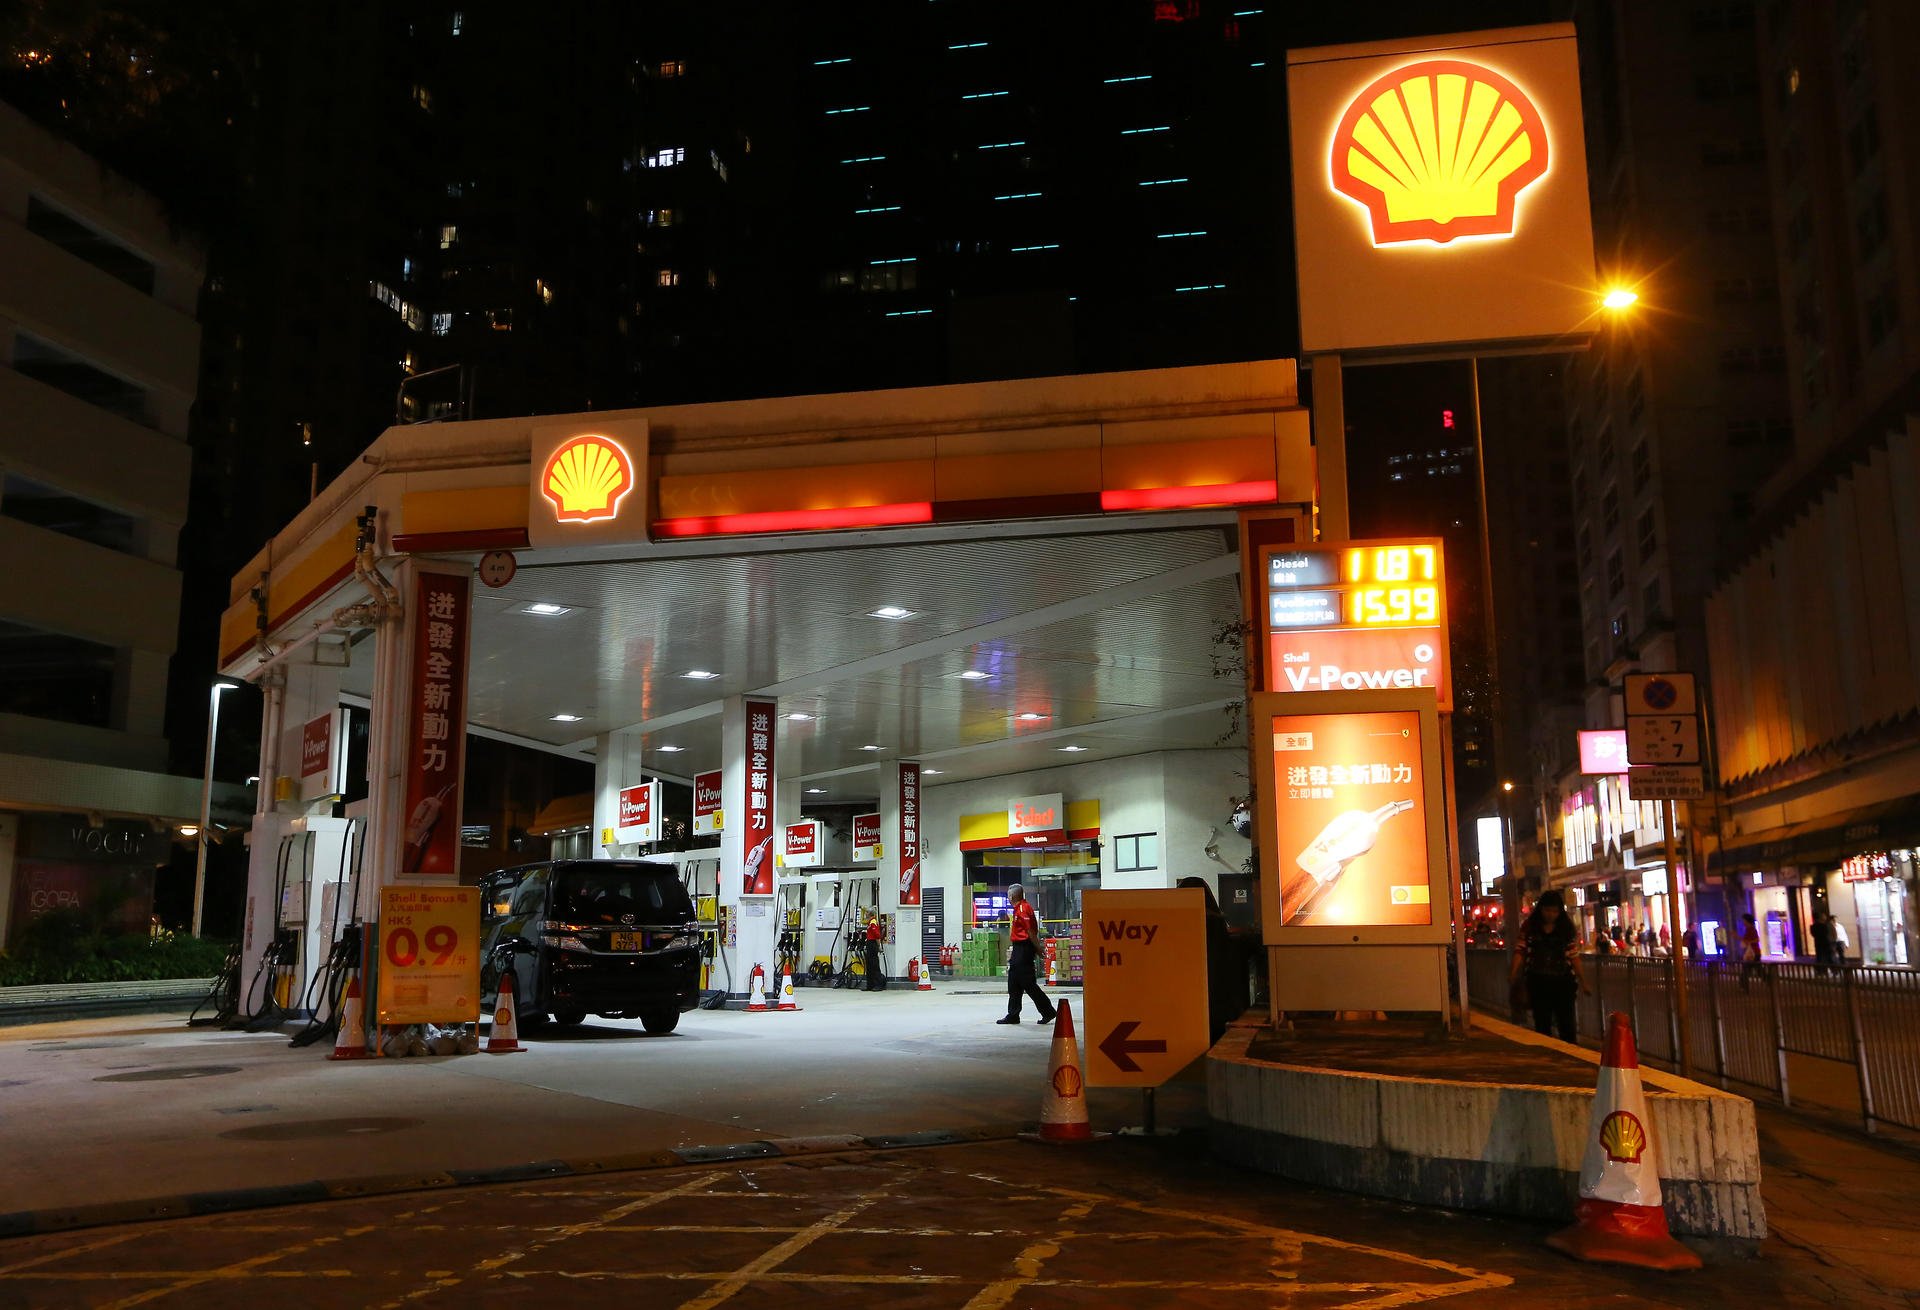 Shell says there is uncertain demand for cleaner biodiesel fuel at its filling stations. Photo: Edmond So